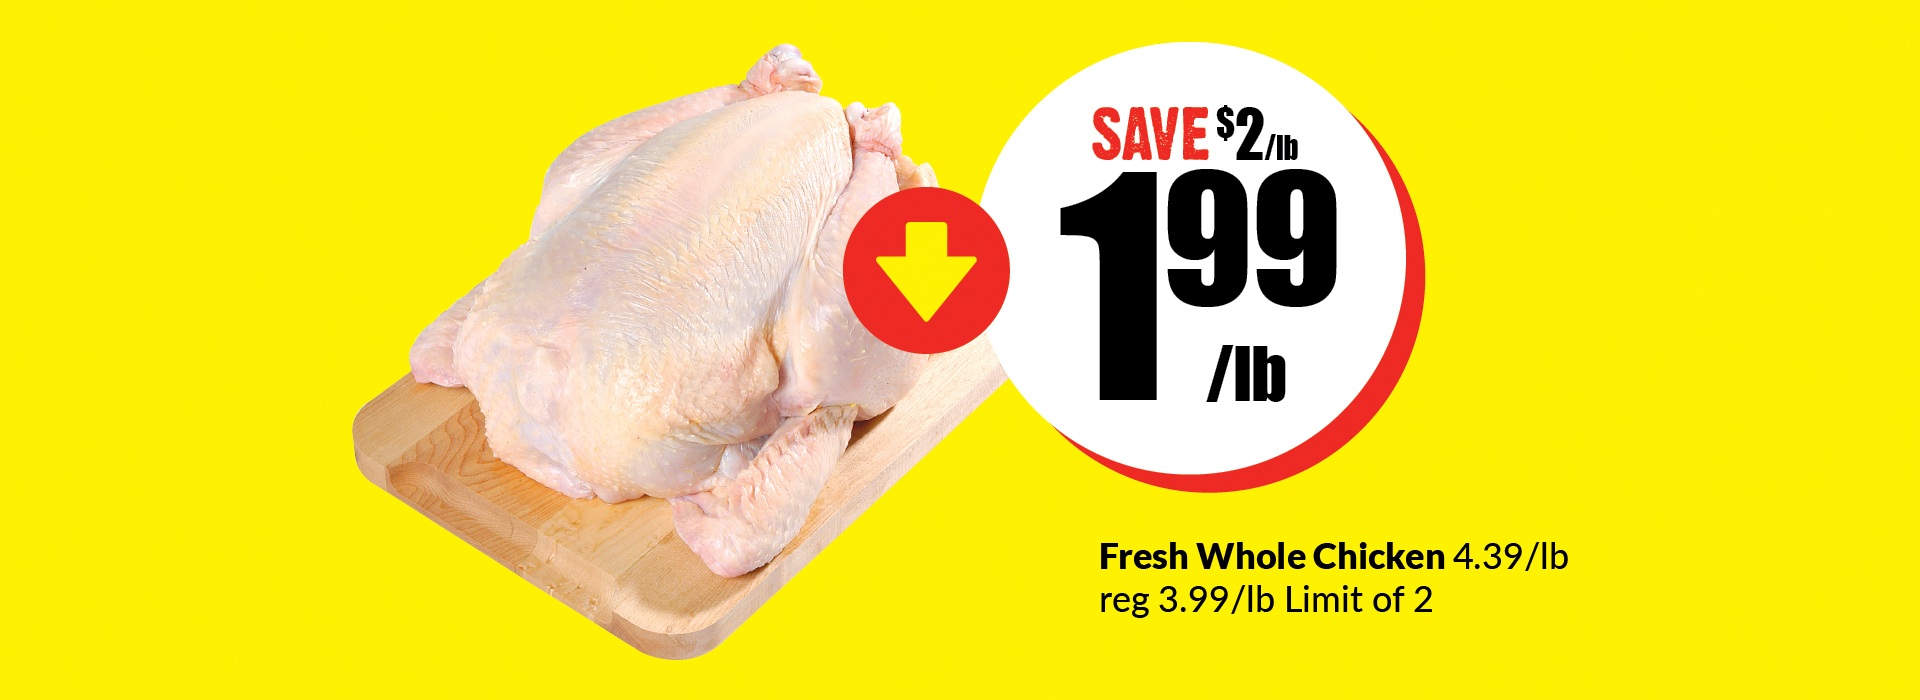 Text Reading, “Buy Fresh Whole Chicken 4.39 per pound now at $1.99 per pound and save $2 per pound. The regular price is $3.99 per pound. Limit of 2.”